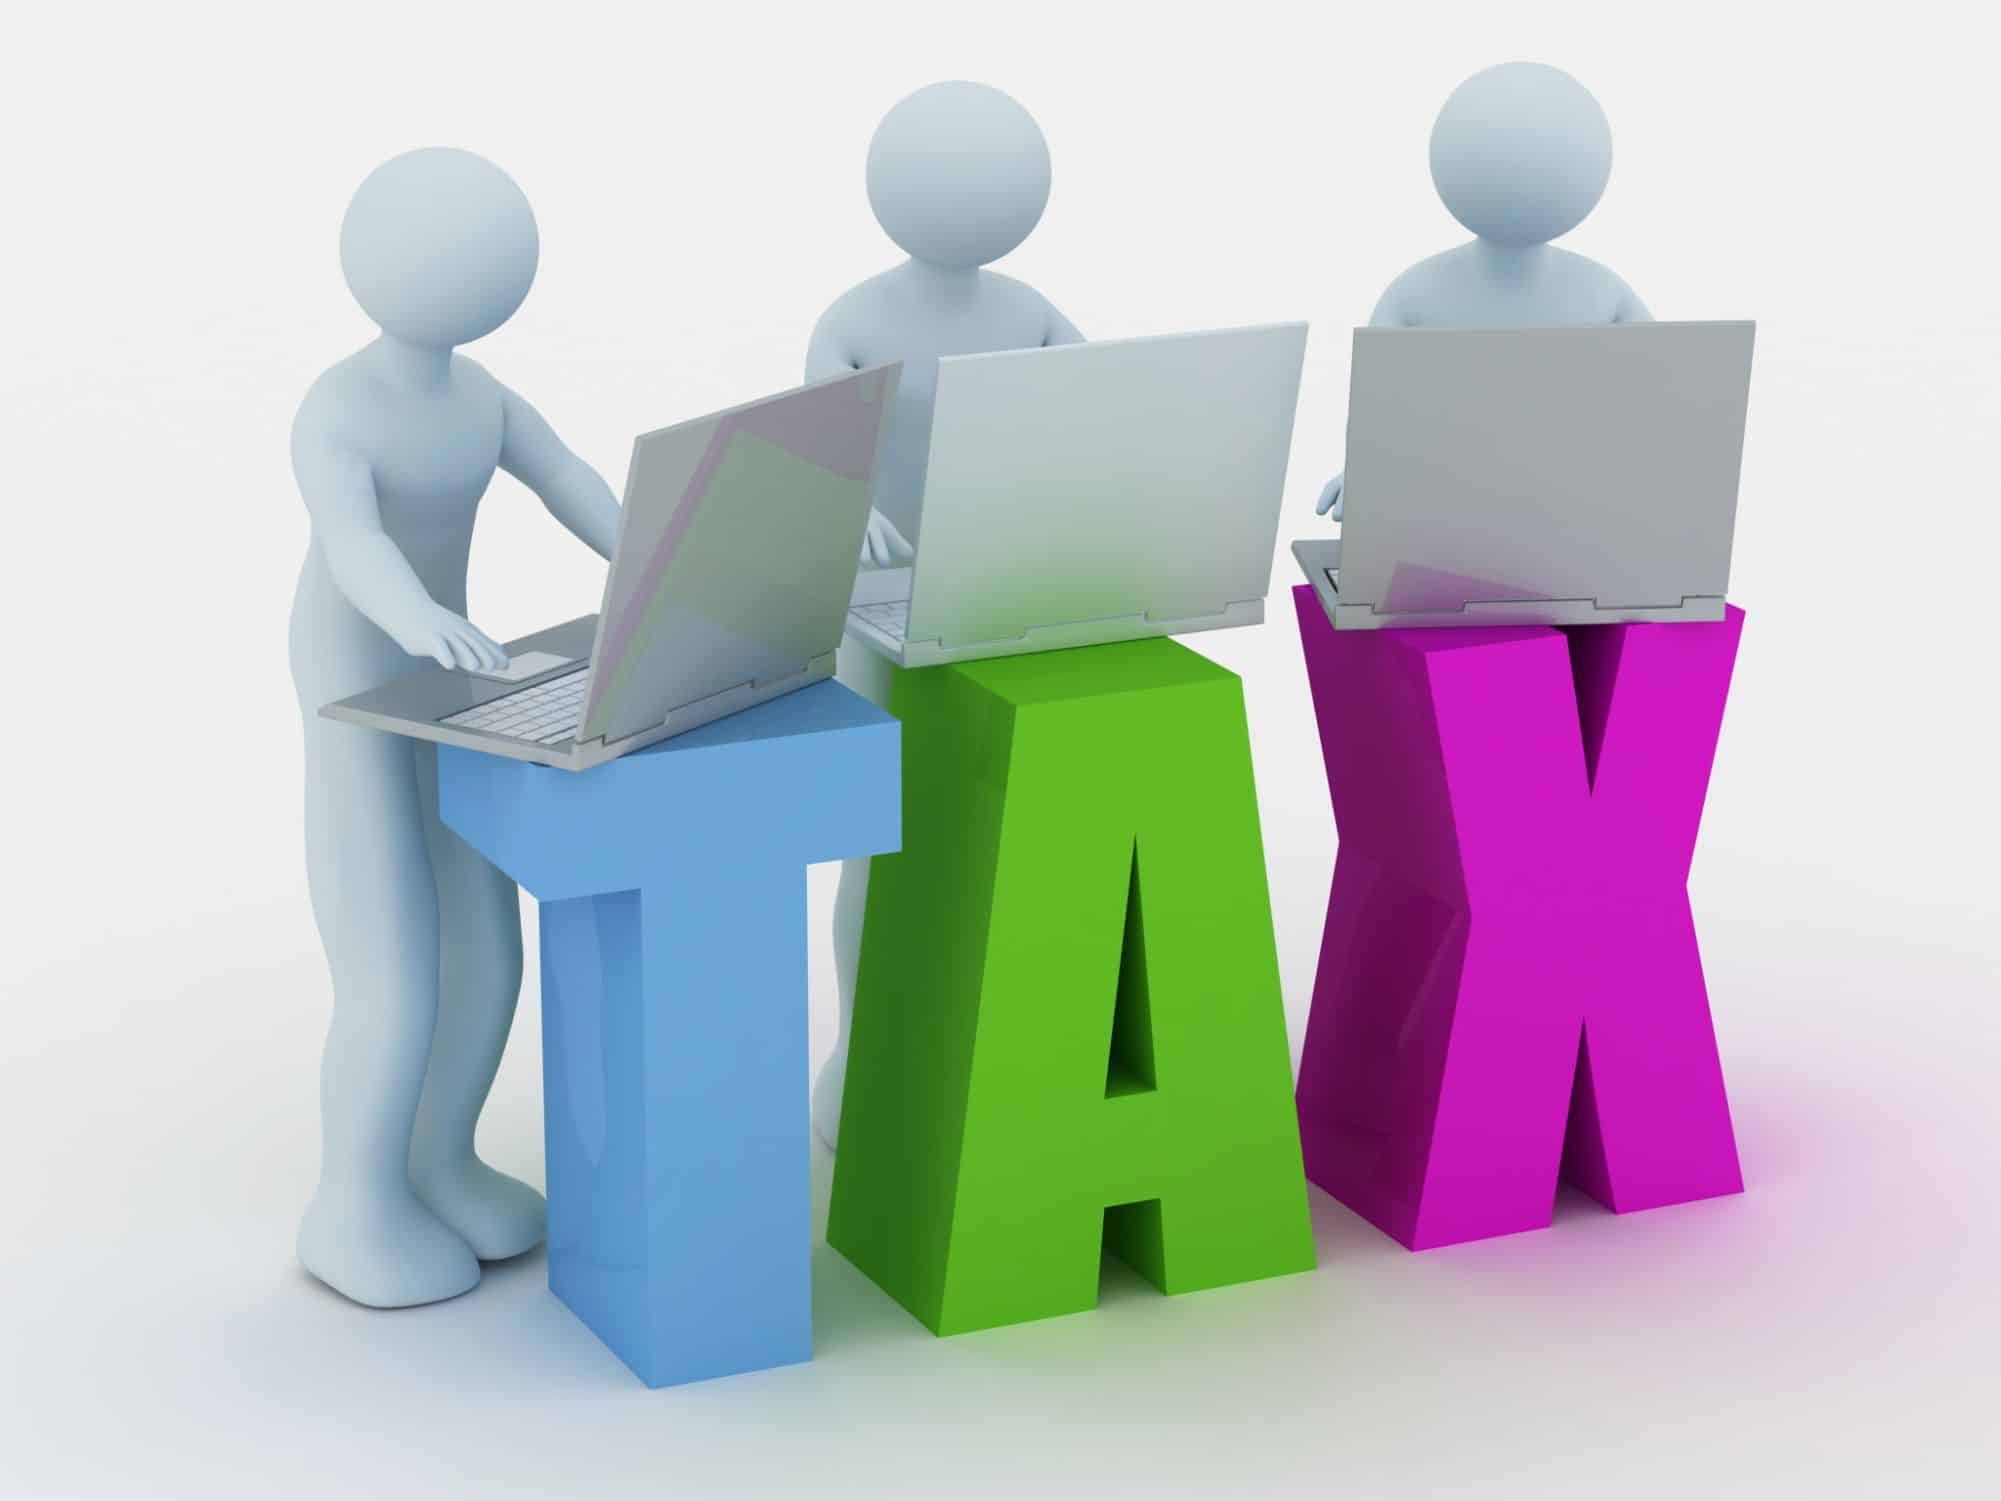 image of 3 people on laptops on top of a tax sign